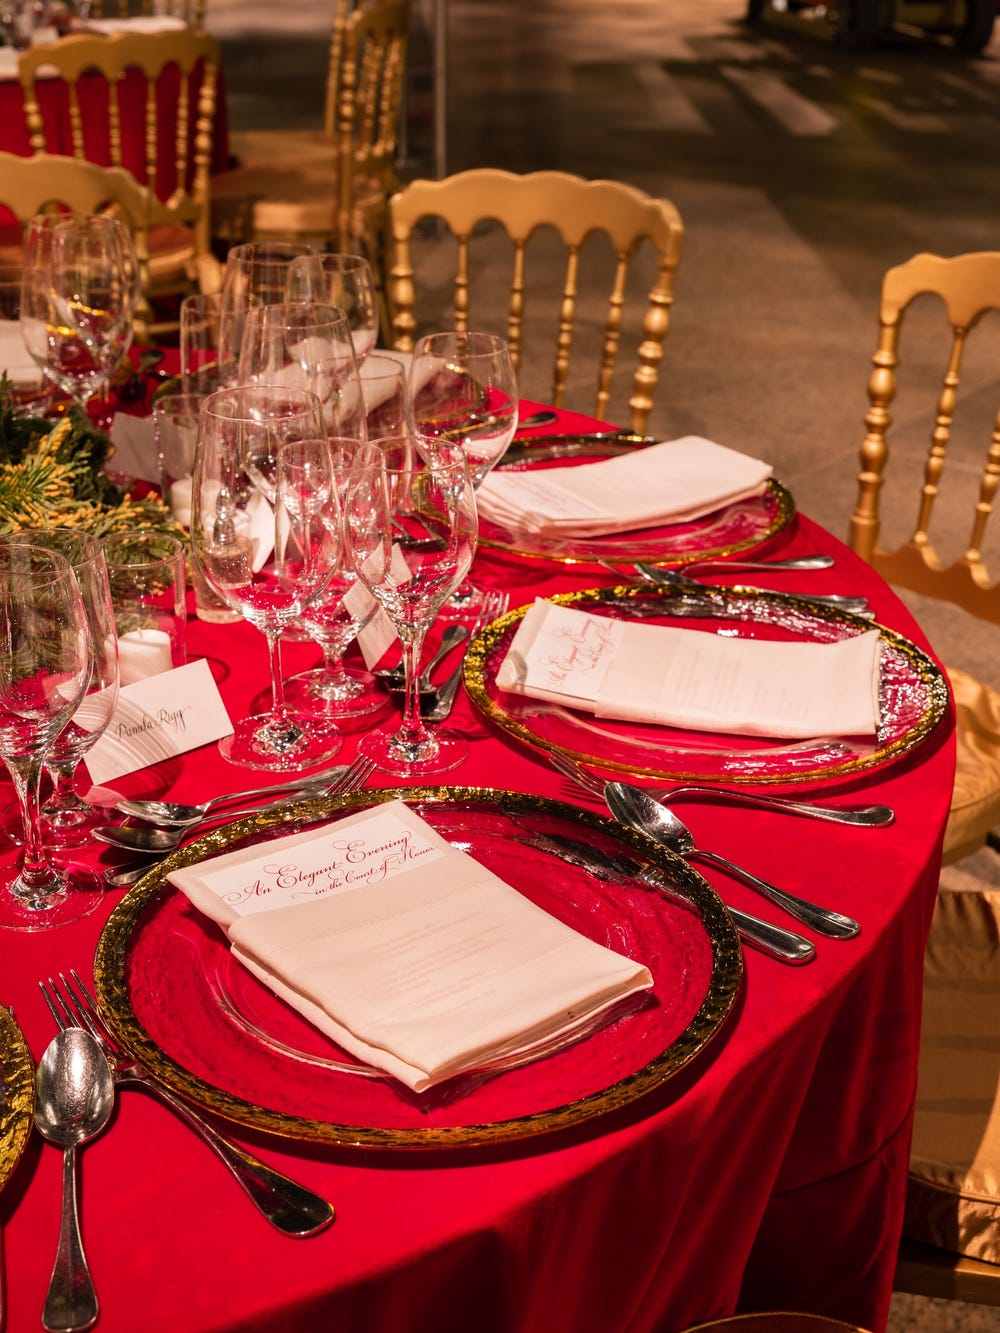 elegant place setting for a Legion of Honor event